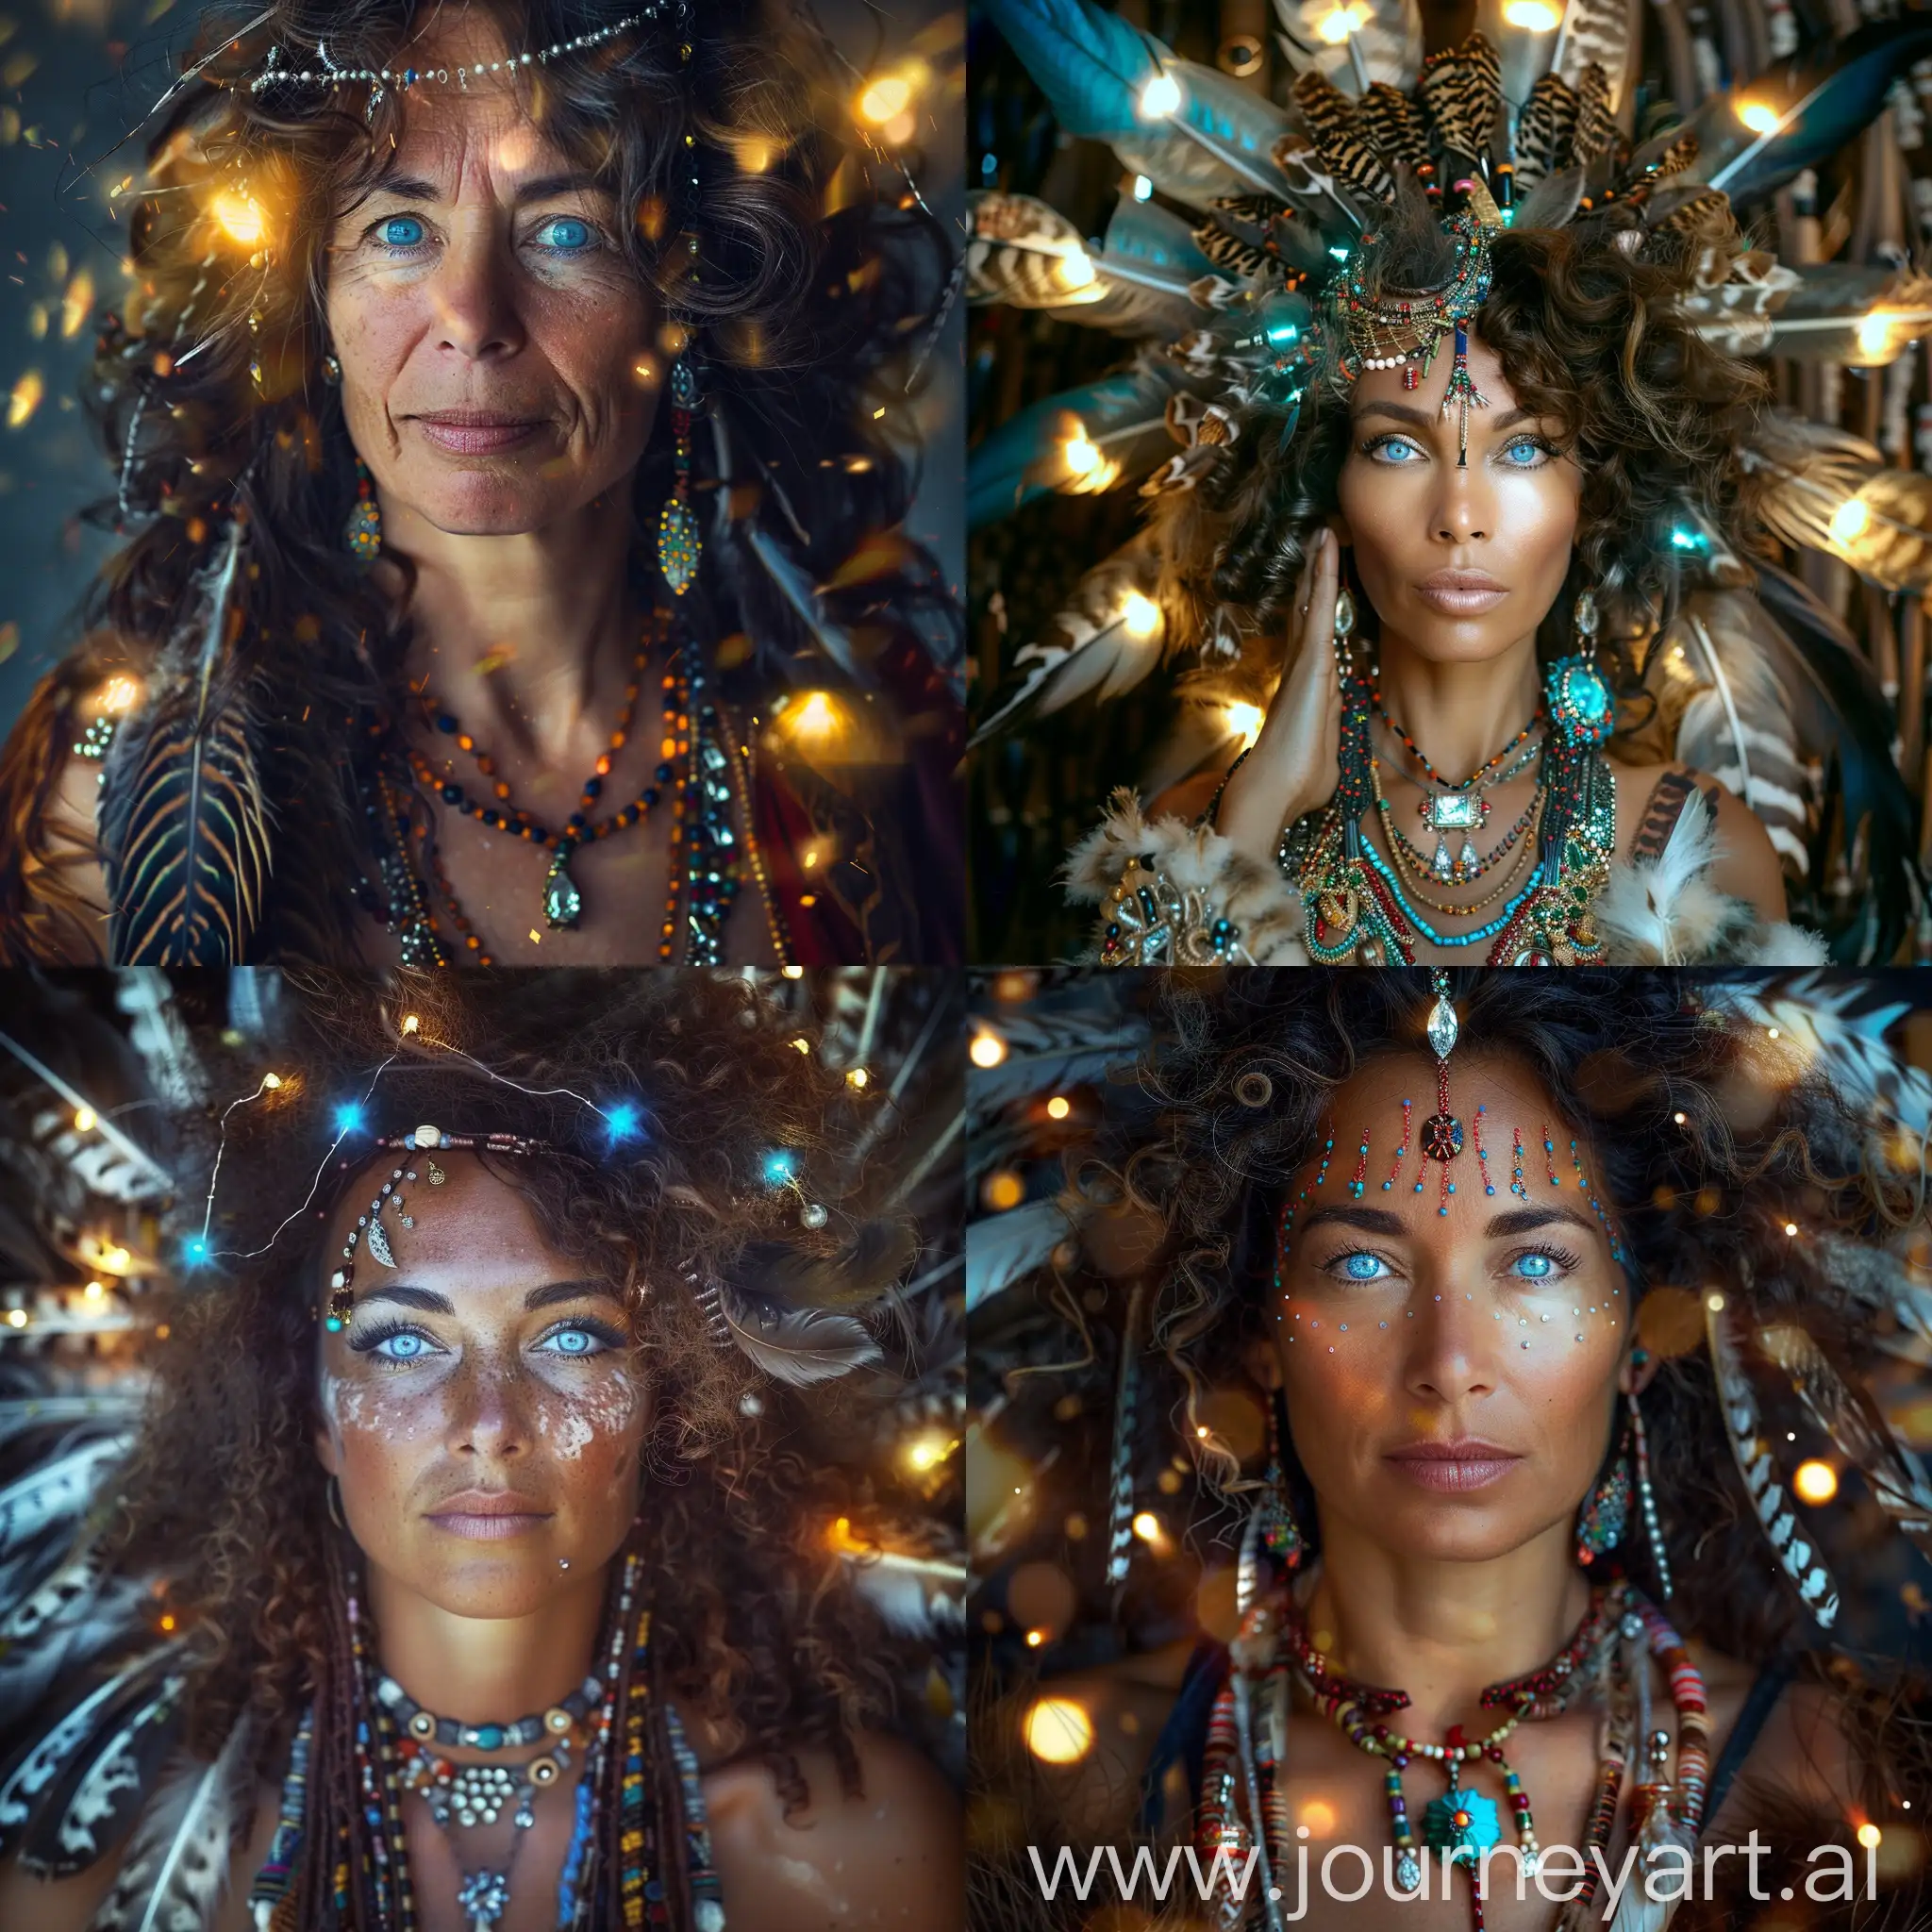 Indian-Shaman-Woman-with-Curly-Brunette-Hair-and-Blue-Eyes-Adorned-with-Feathers-and-Beads